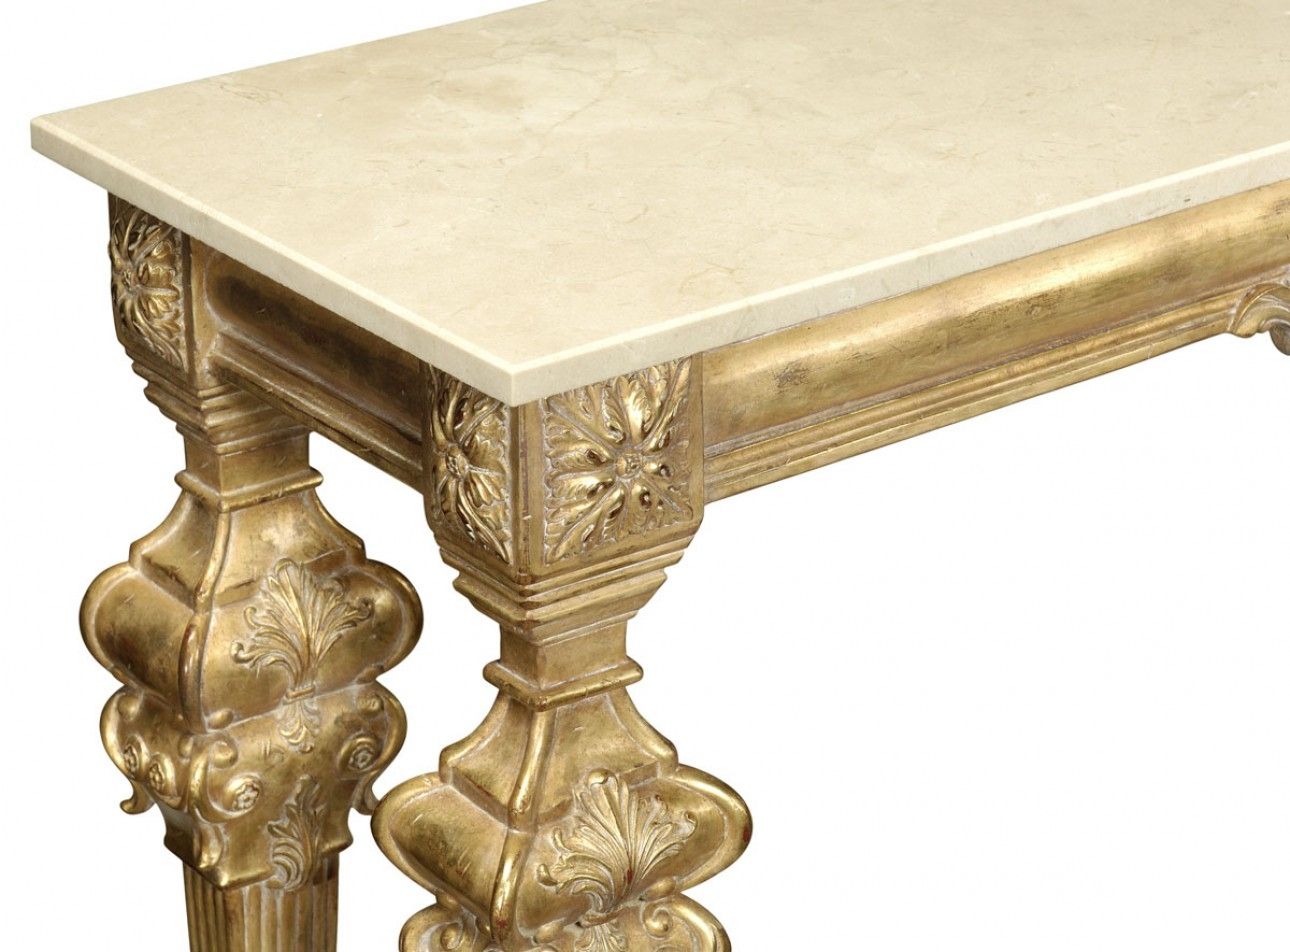 Gold Antique Finish, Marble Top, Hand Carved (View 14 of 20)